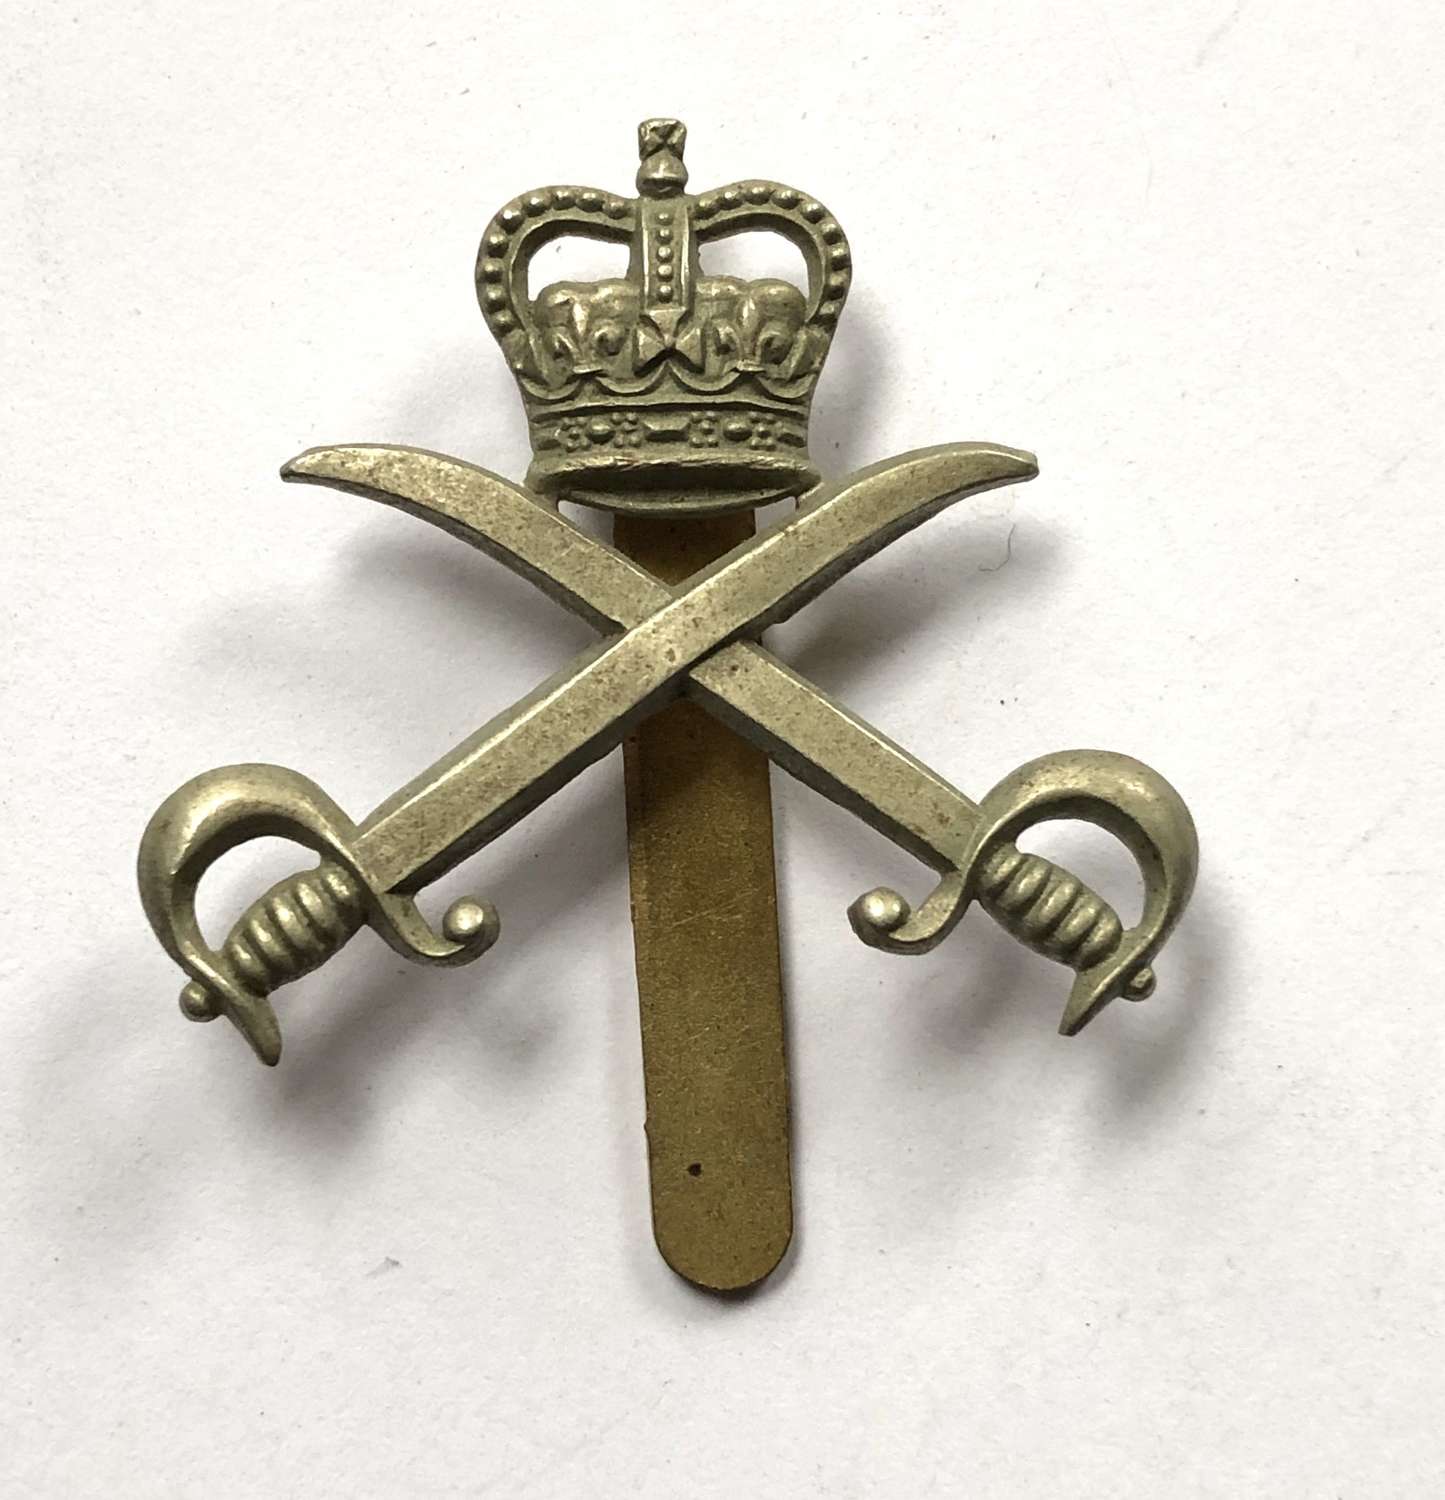 Royal Army Phyisical Training Corps cap badge c1952 by Gaunt, London